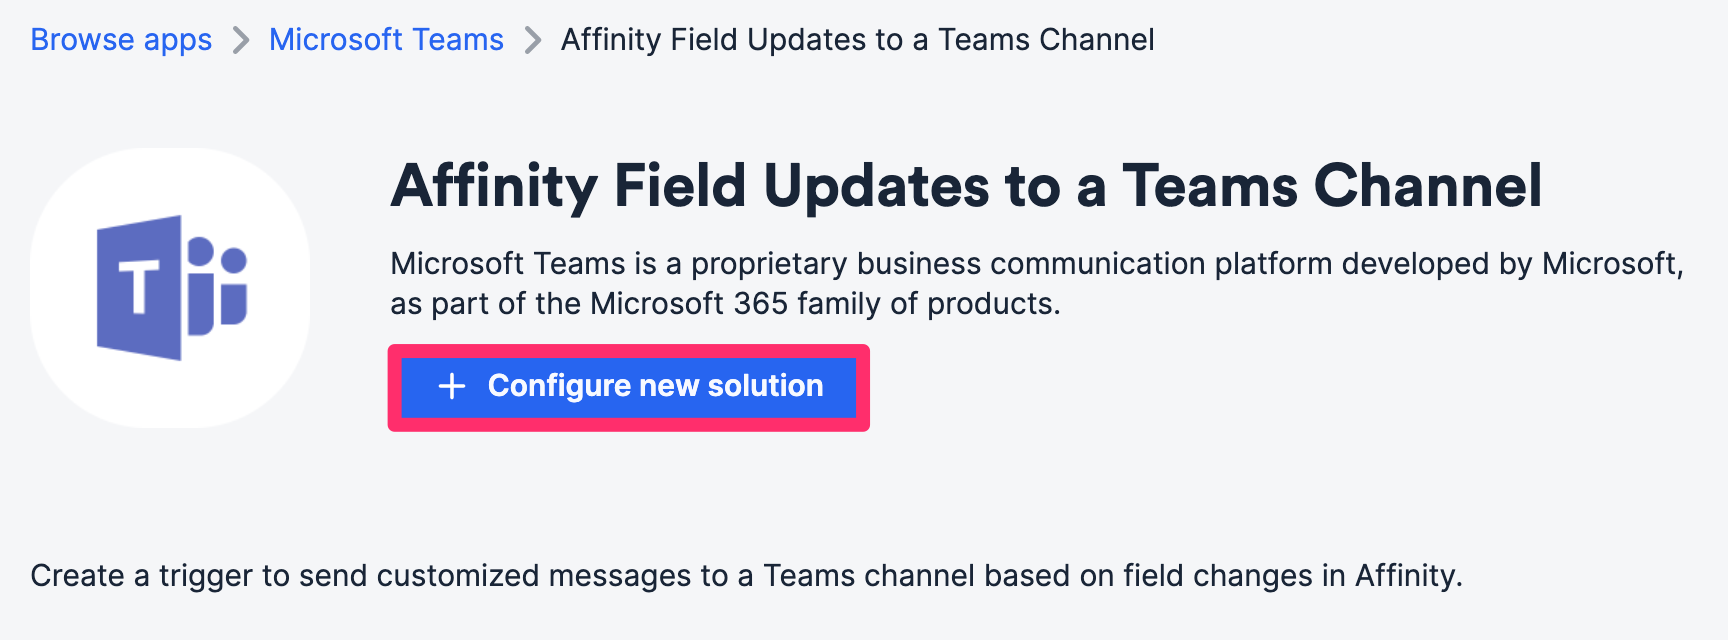 Affinity_Field_Updates_to_a_Teams_Channel_-_Configure_new.png